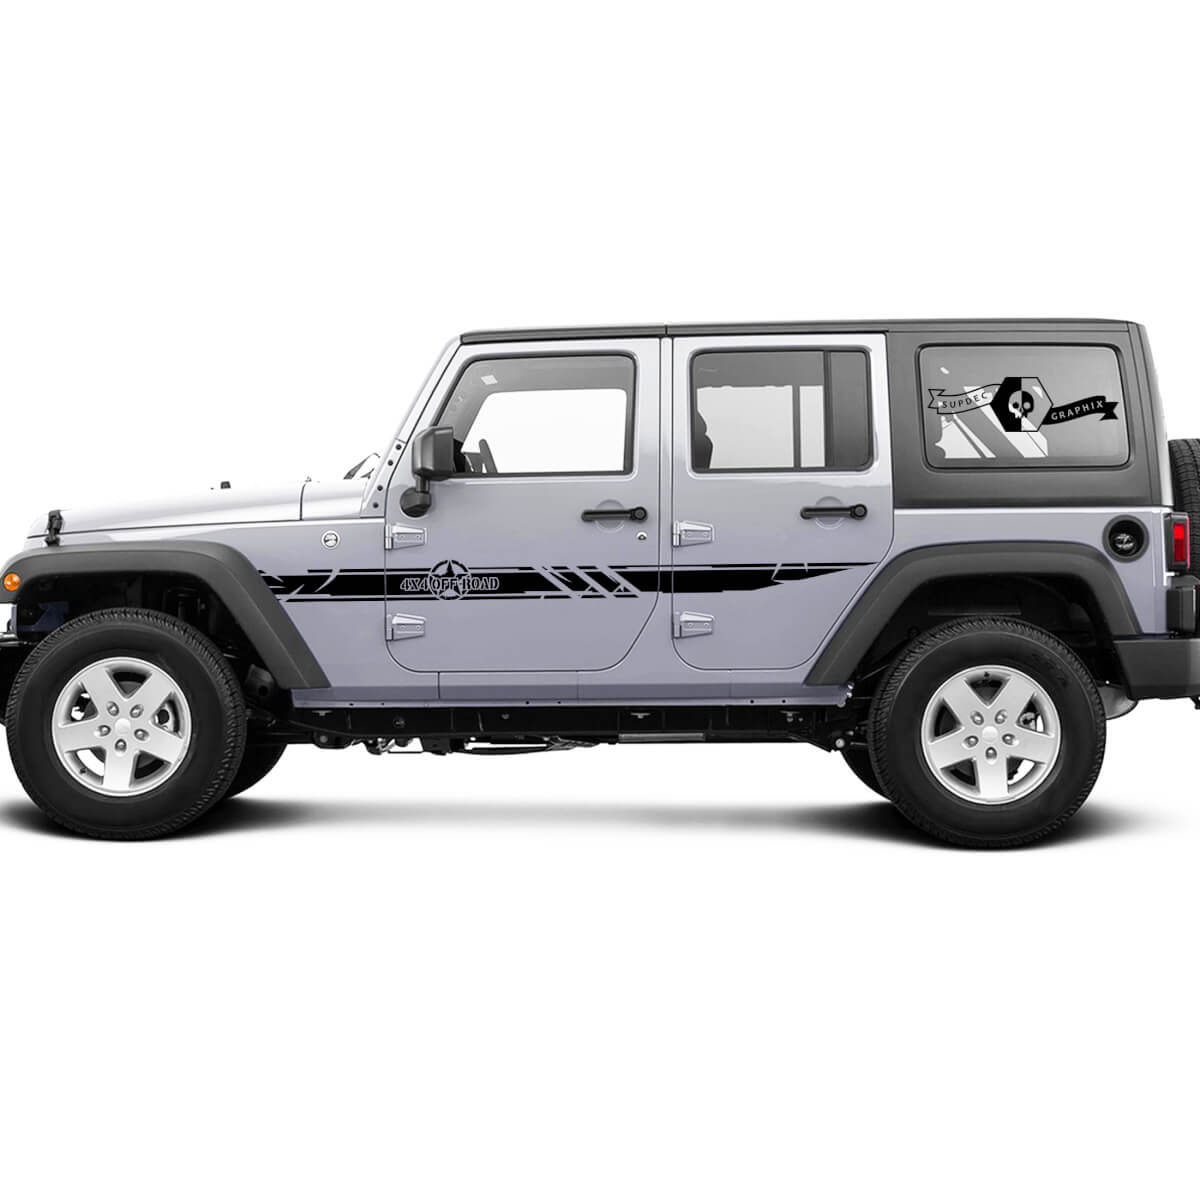 2 Side Jeep Wrangler Destroyed Military Army Star 4x4 Off Road Doors Side Vinyl Decals Graphics Sticker